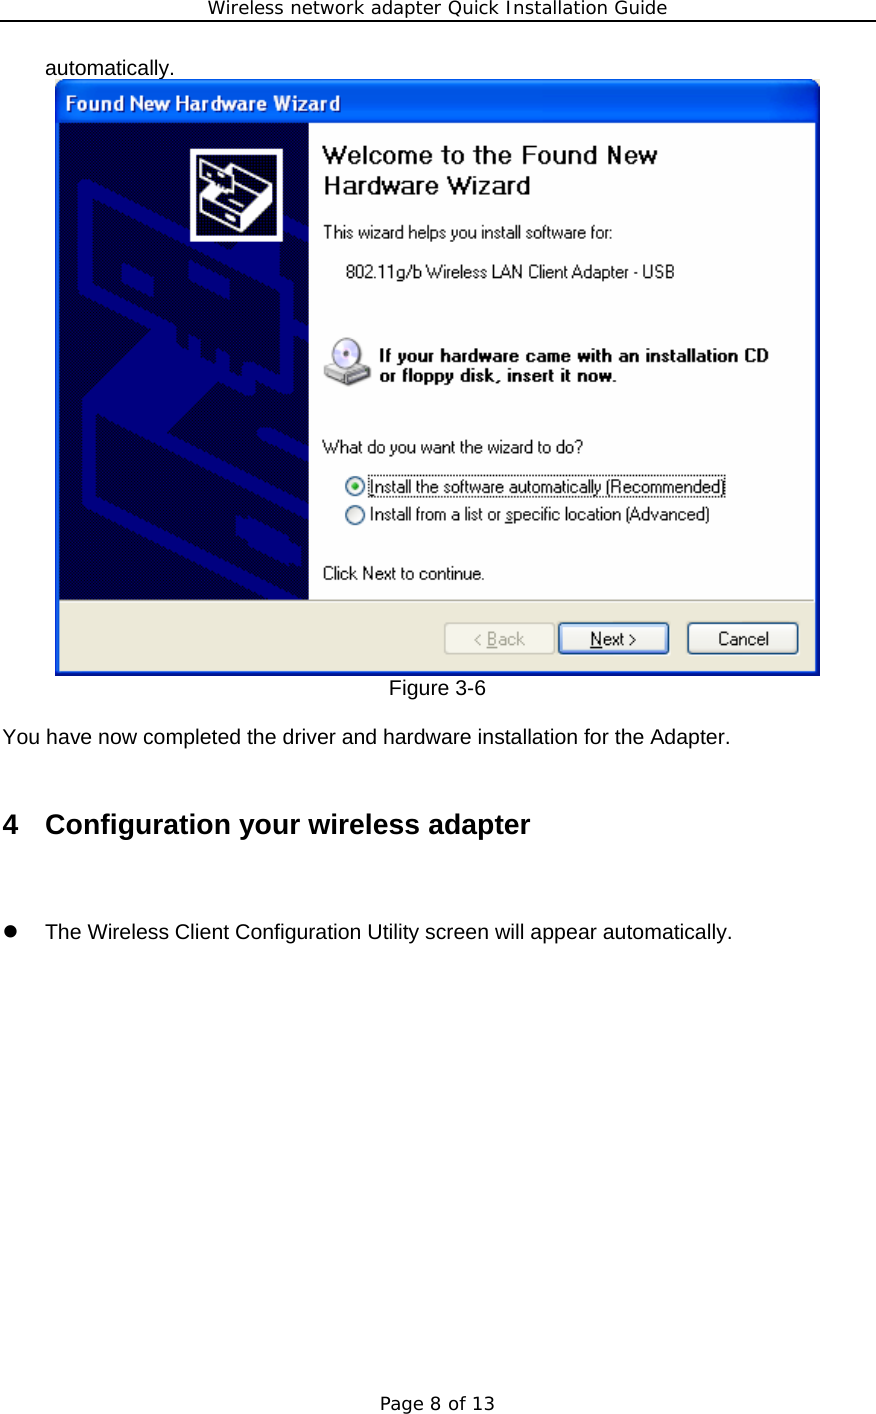 Wireless network adapter Quick Installation Guide Page 8 of 13 automatically.  Figure 3-6  You have now completed the driver and hardware installation for the Adapter.  4  Configuration your wireless adapter z  The Wireless Client Configuration Utility screen will appear automatically. 